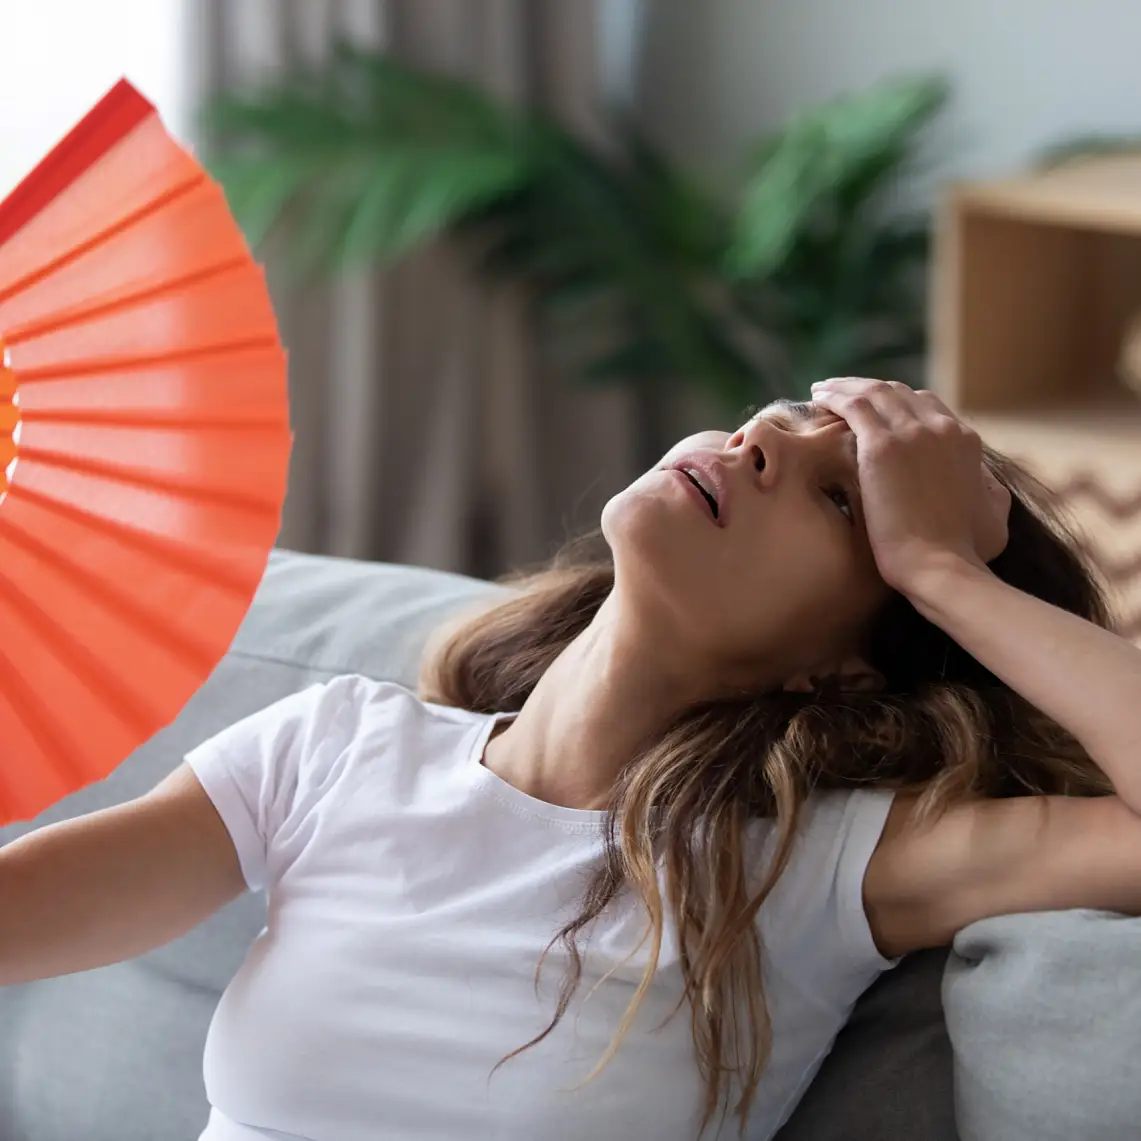 Overheated woman sitting on couch, waving orange paper fan close up, girl feeling unwell, suffering from heating at home, feeling discomfort, hot summer weather or fever, sitting on couch alone